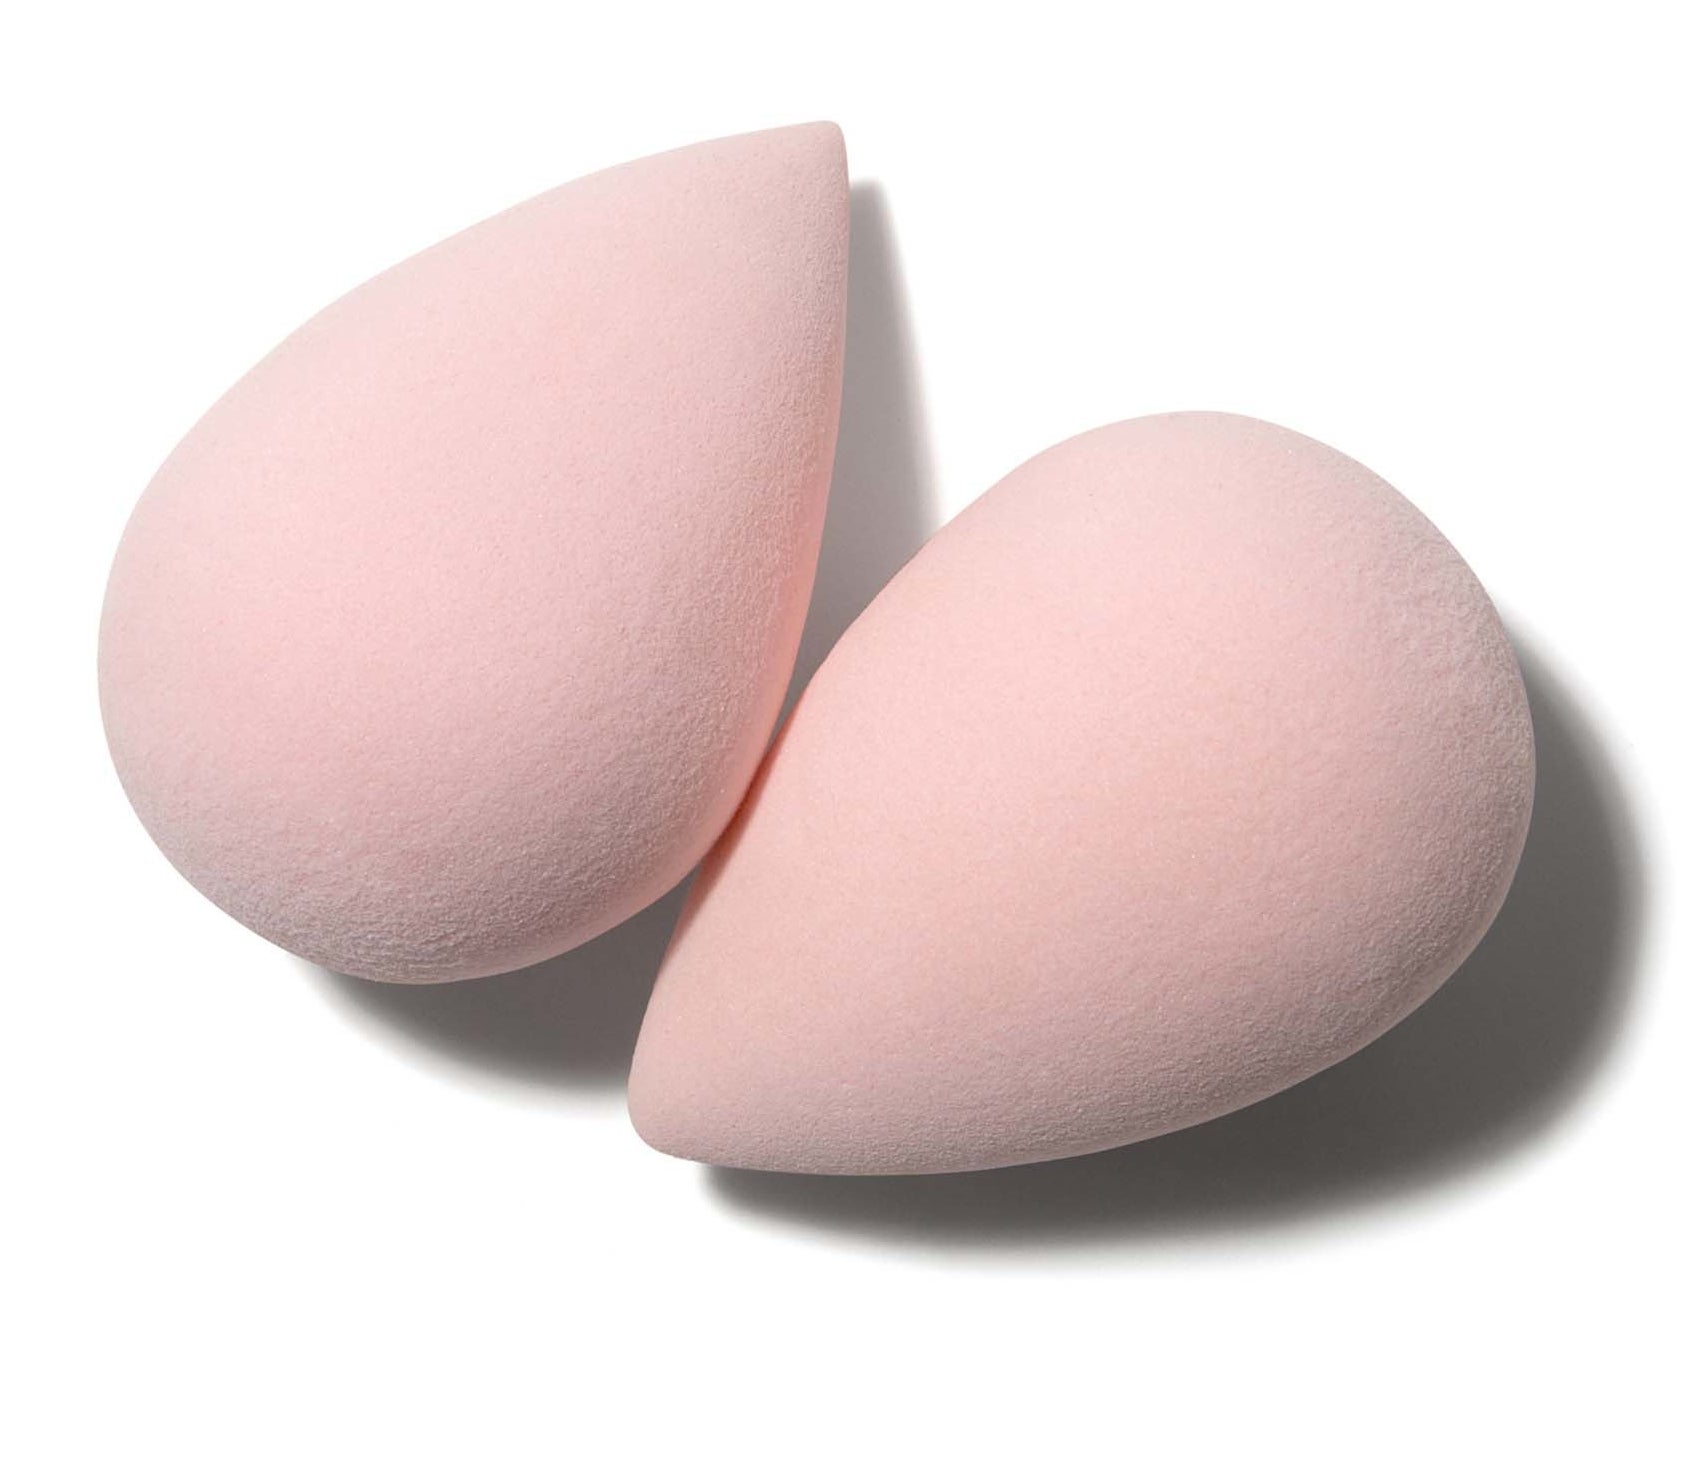 Two pink sponges on white background